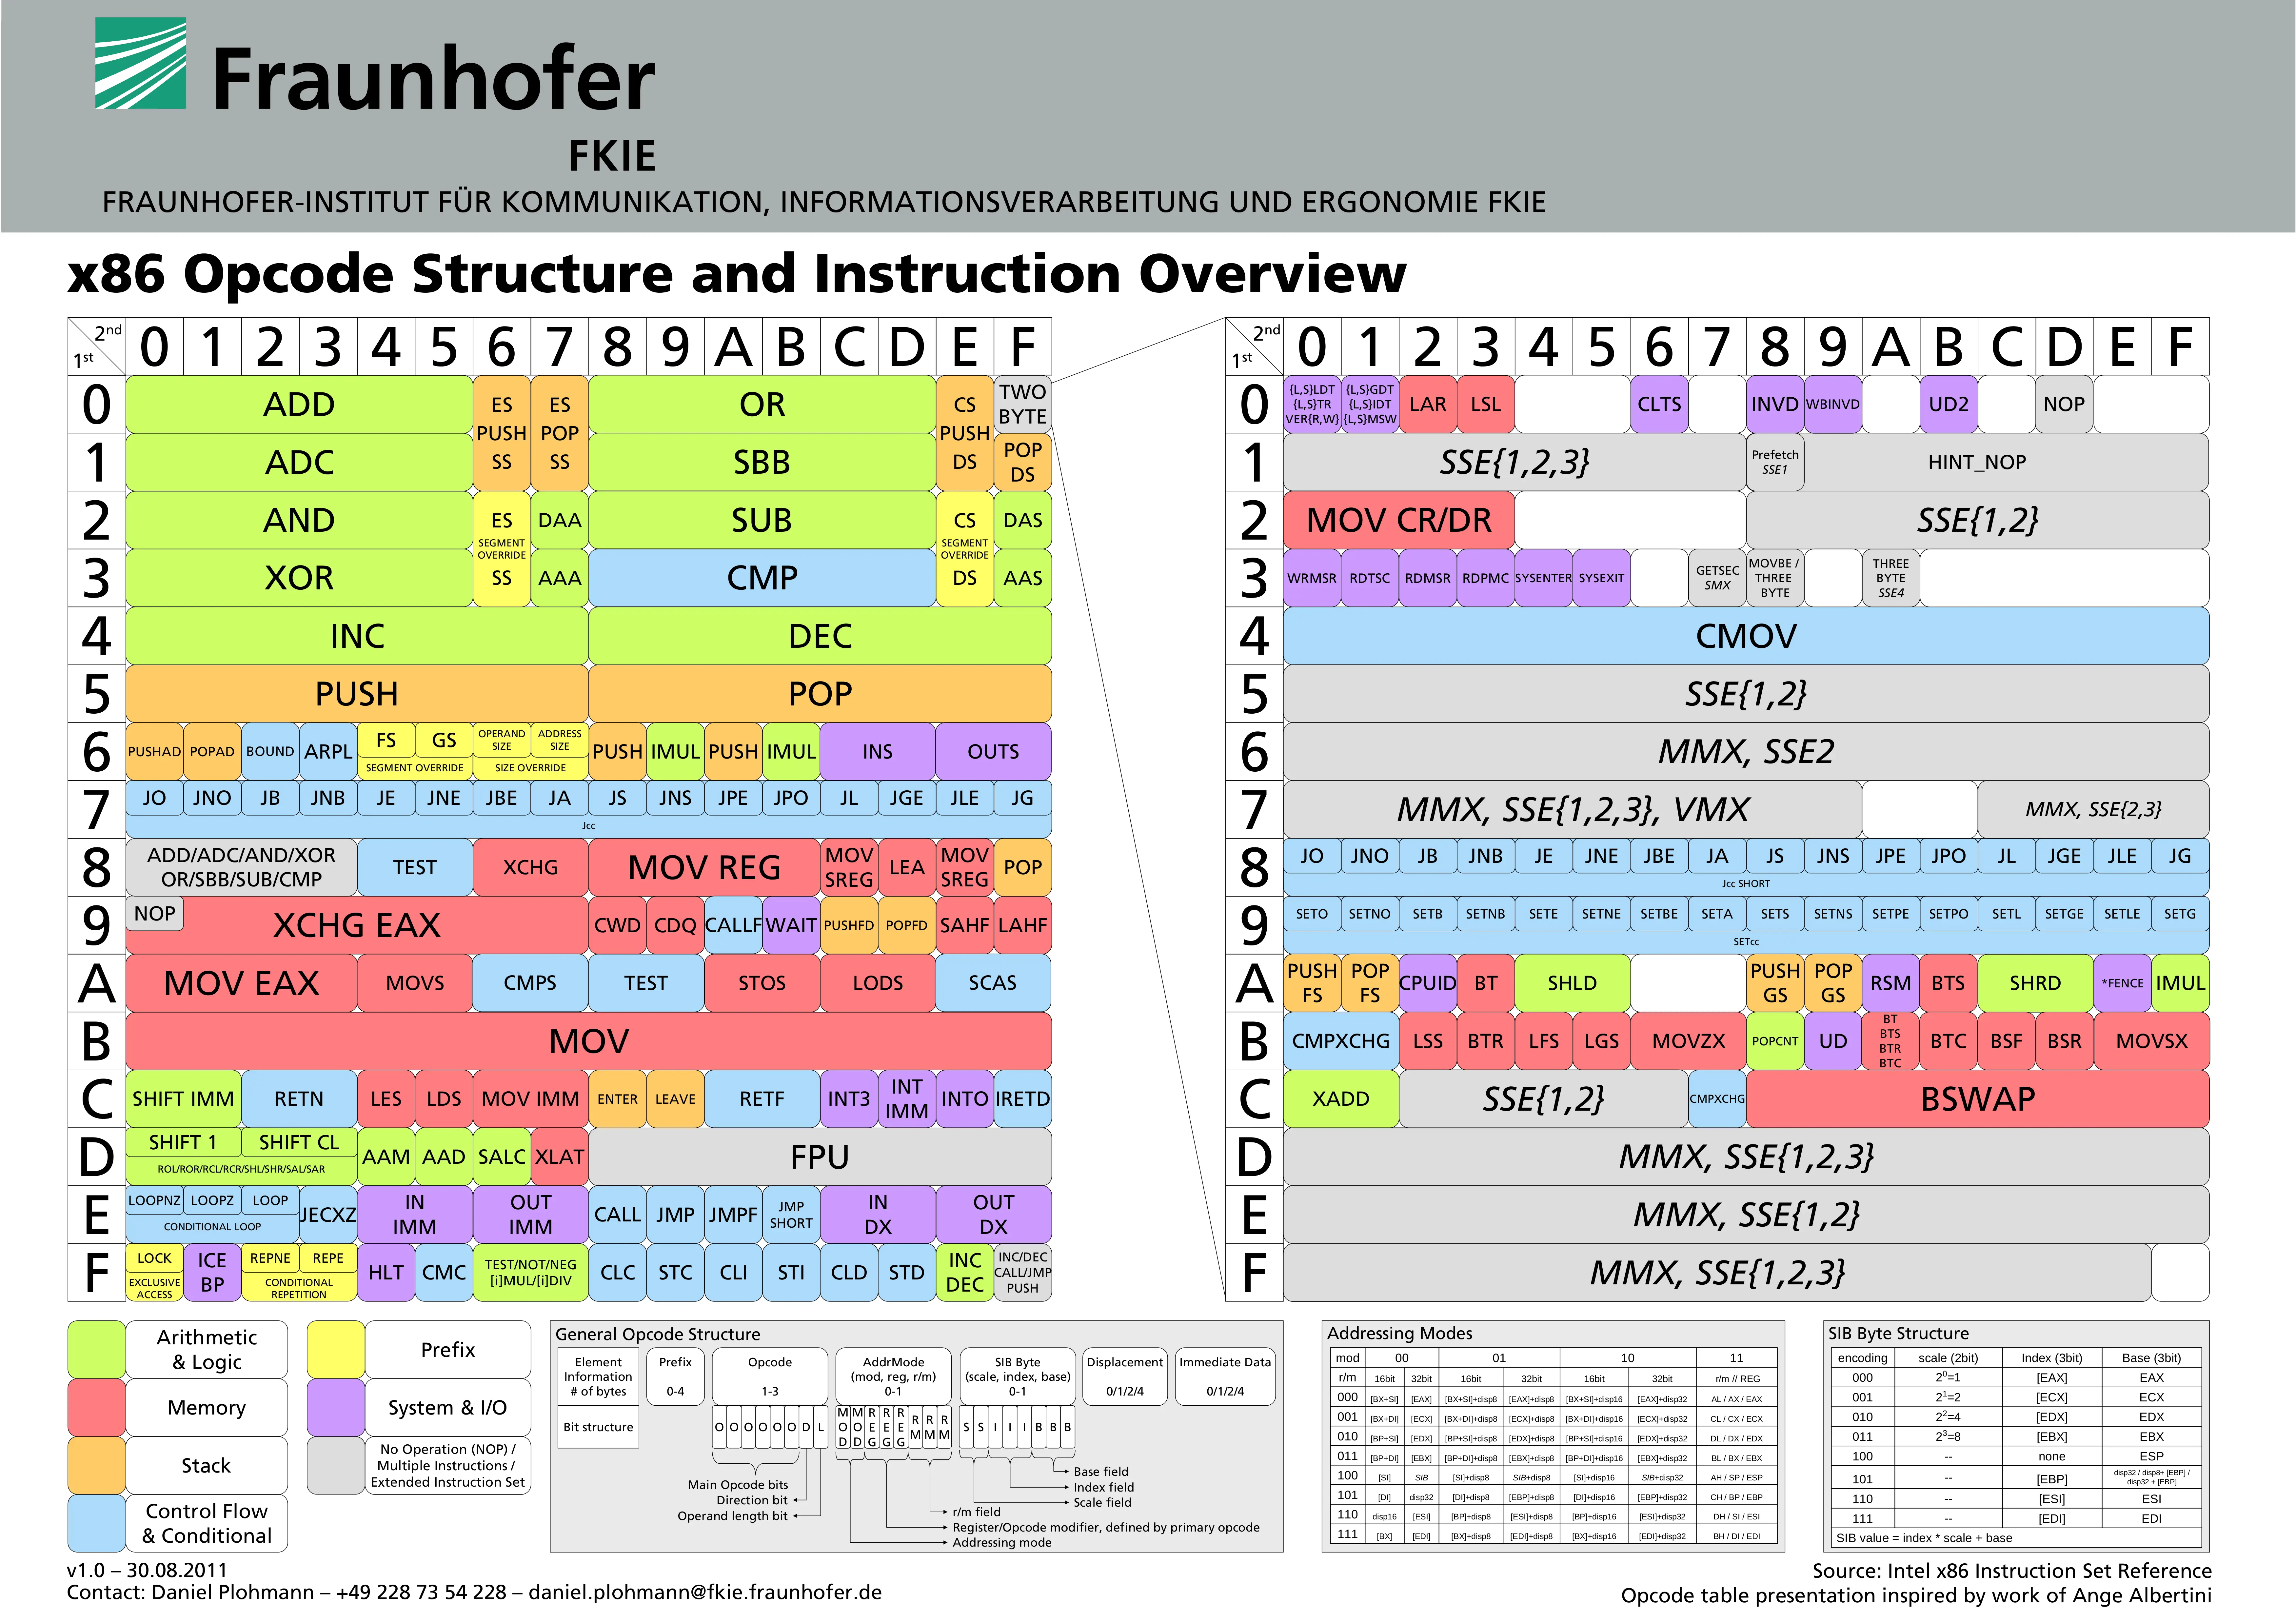 x86_opcode_structure_and_instruction_overview